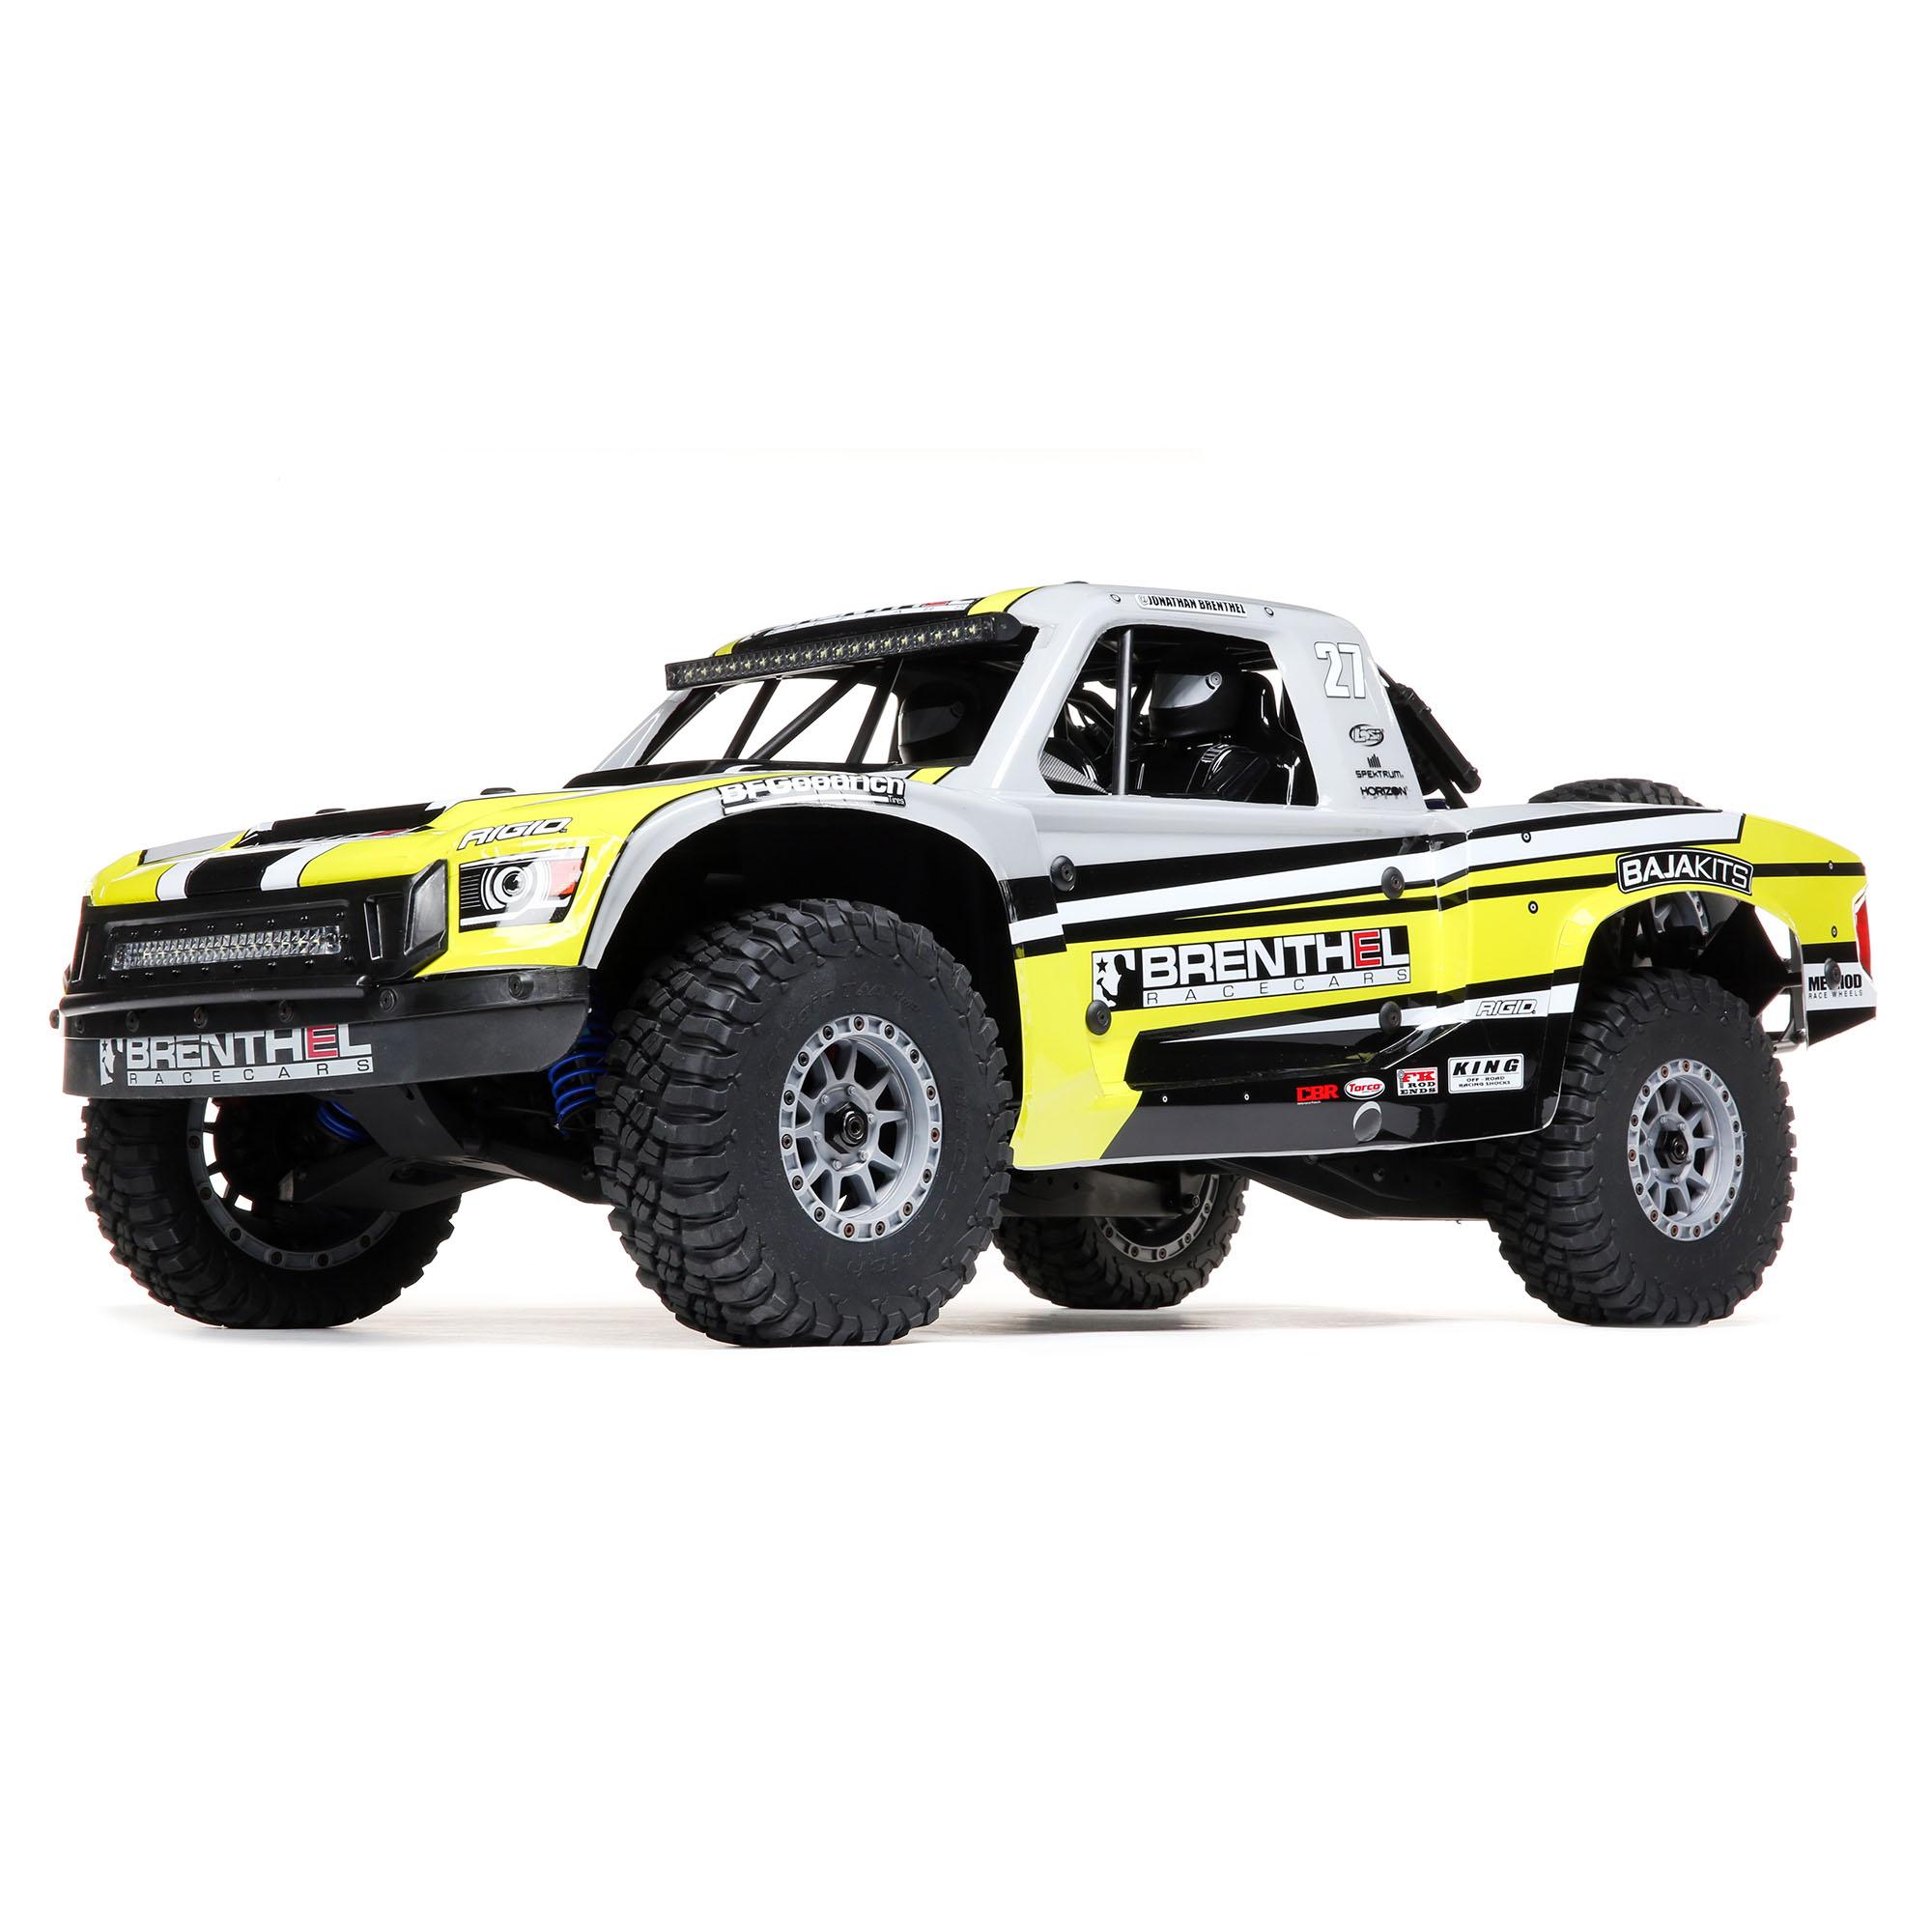 Trophy Truck Rc Car: Maximize Your Off-Road Racing with Trophy Truck RC Cars